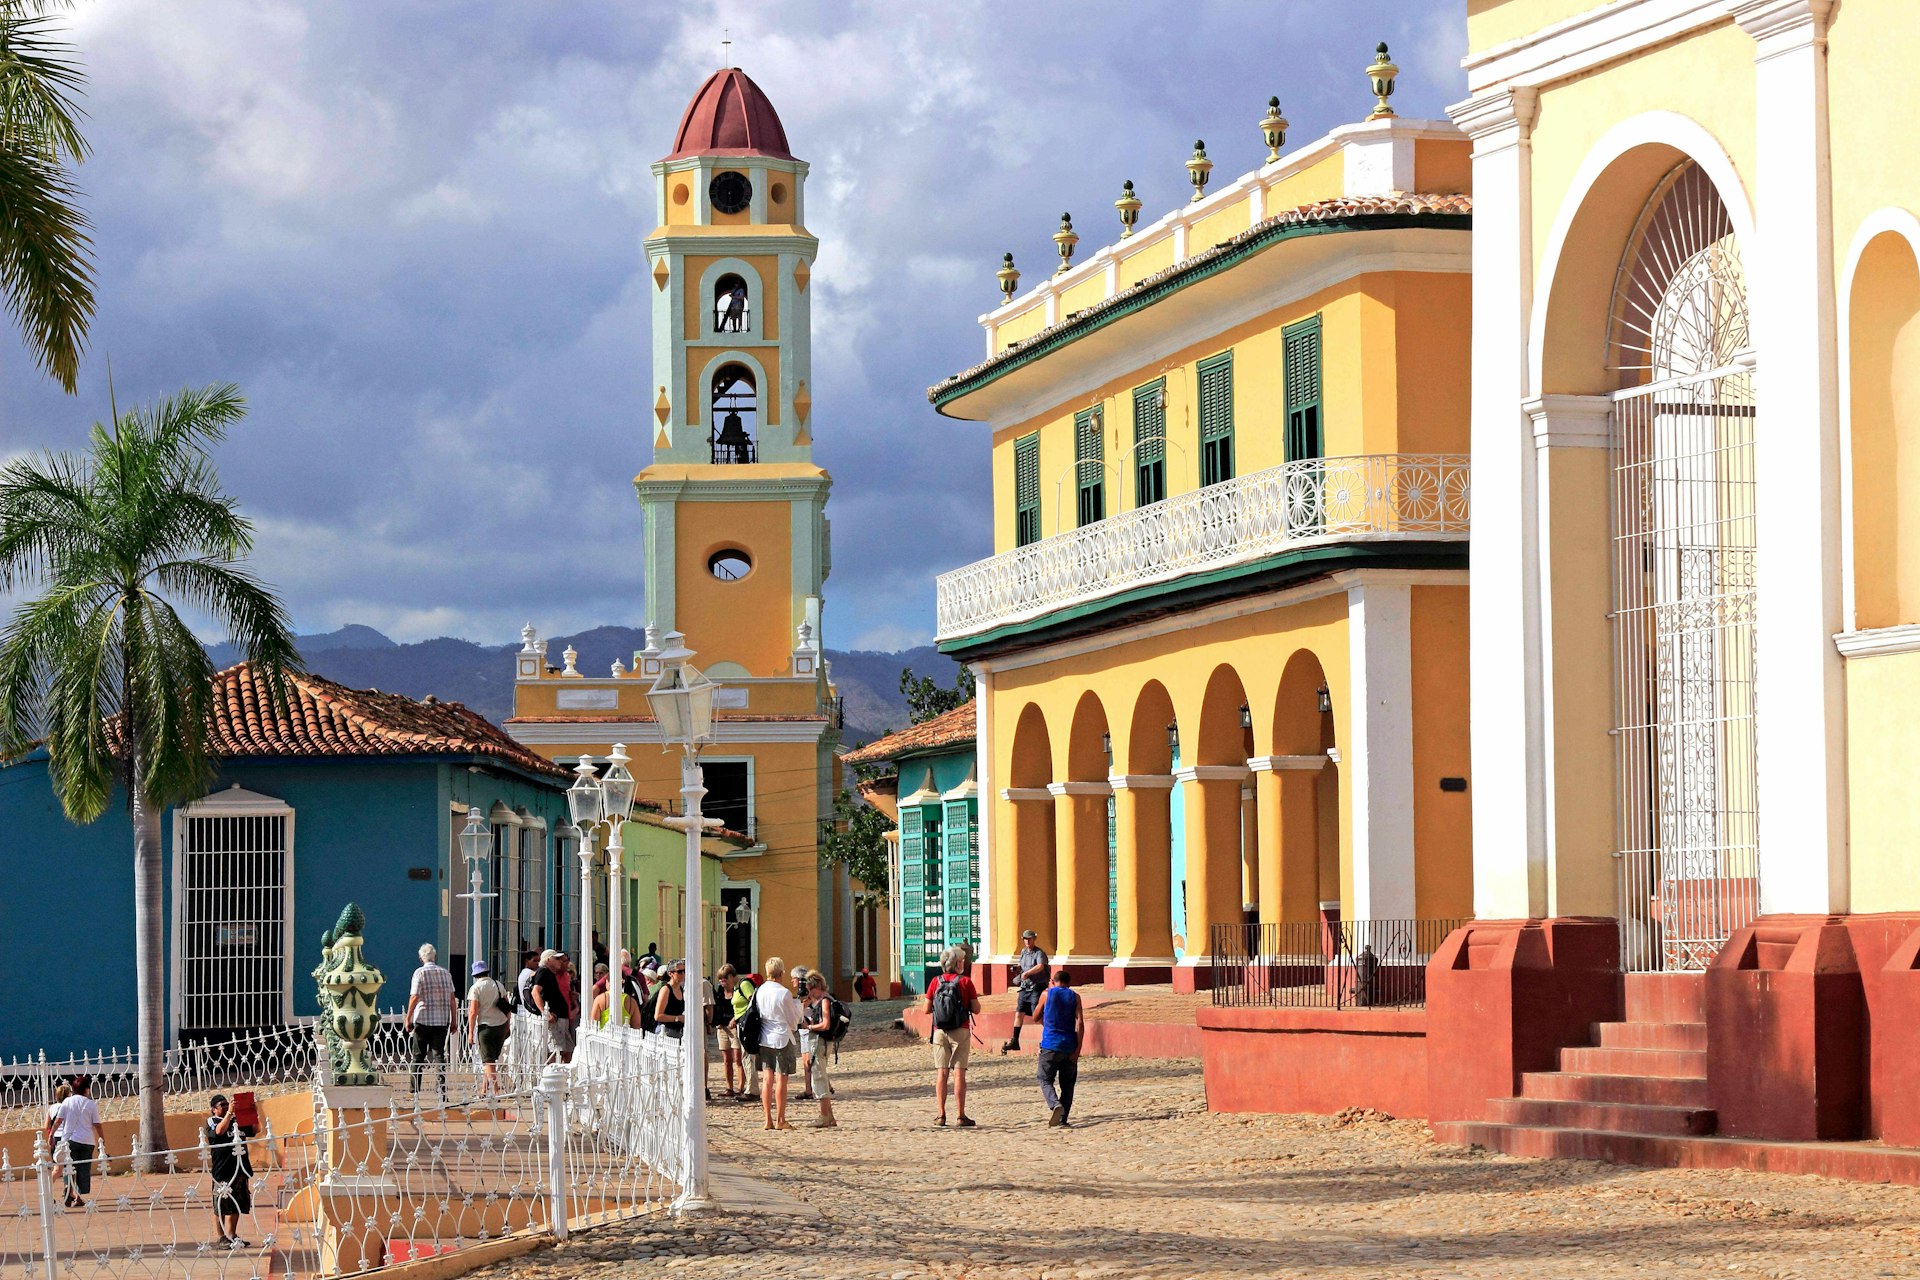 Brunet Palace and San Francisco Church on the Plaza Mayor in Trinidad, Cuba. Image by Education Images / Universal Images Group / Getty